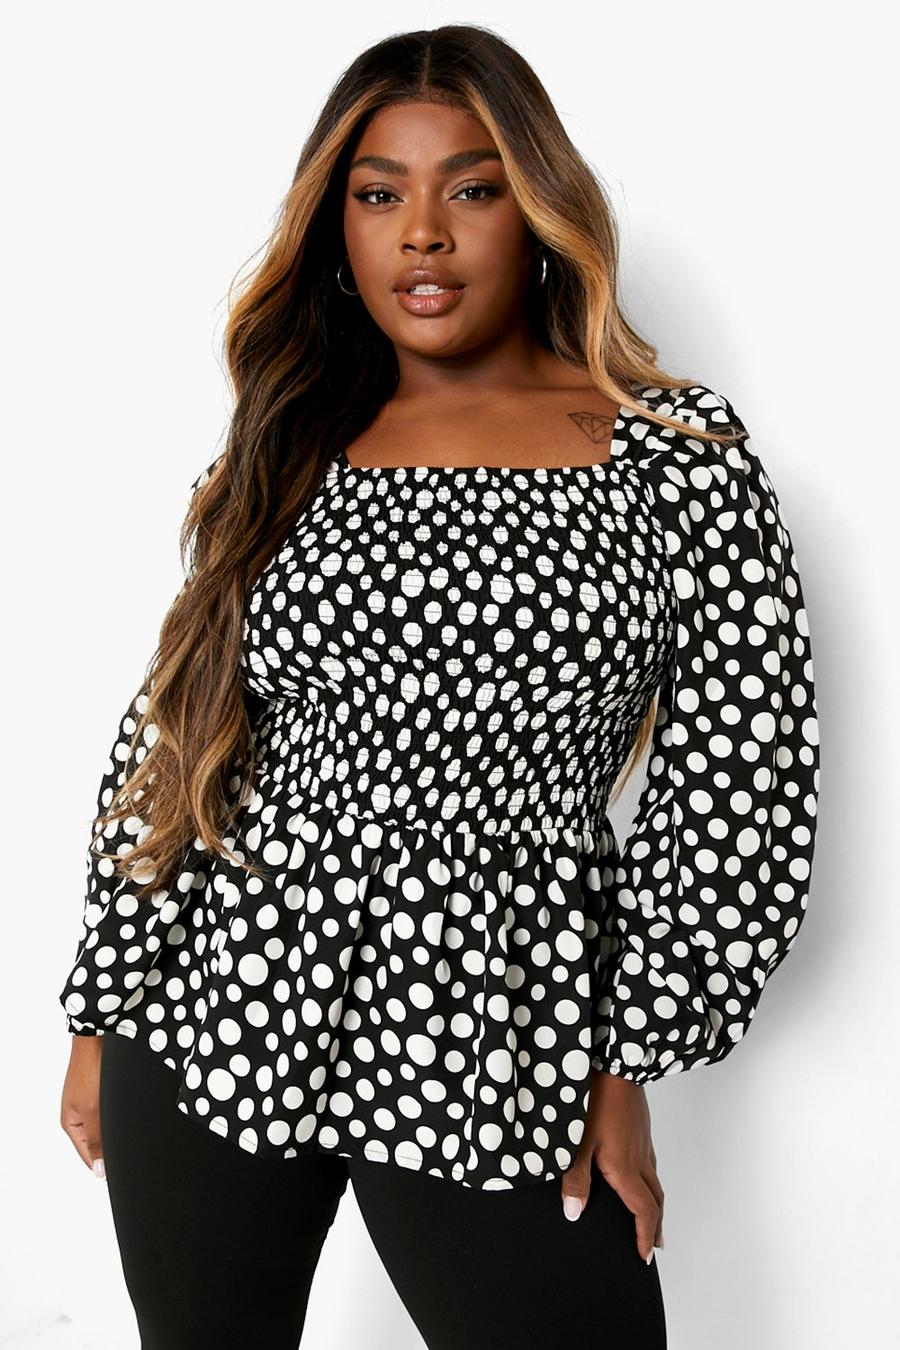 Plus Size Going Out Tops, Plus Going Out Tops